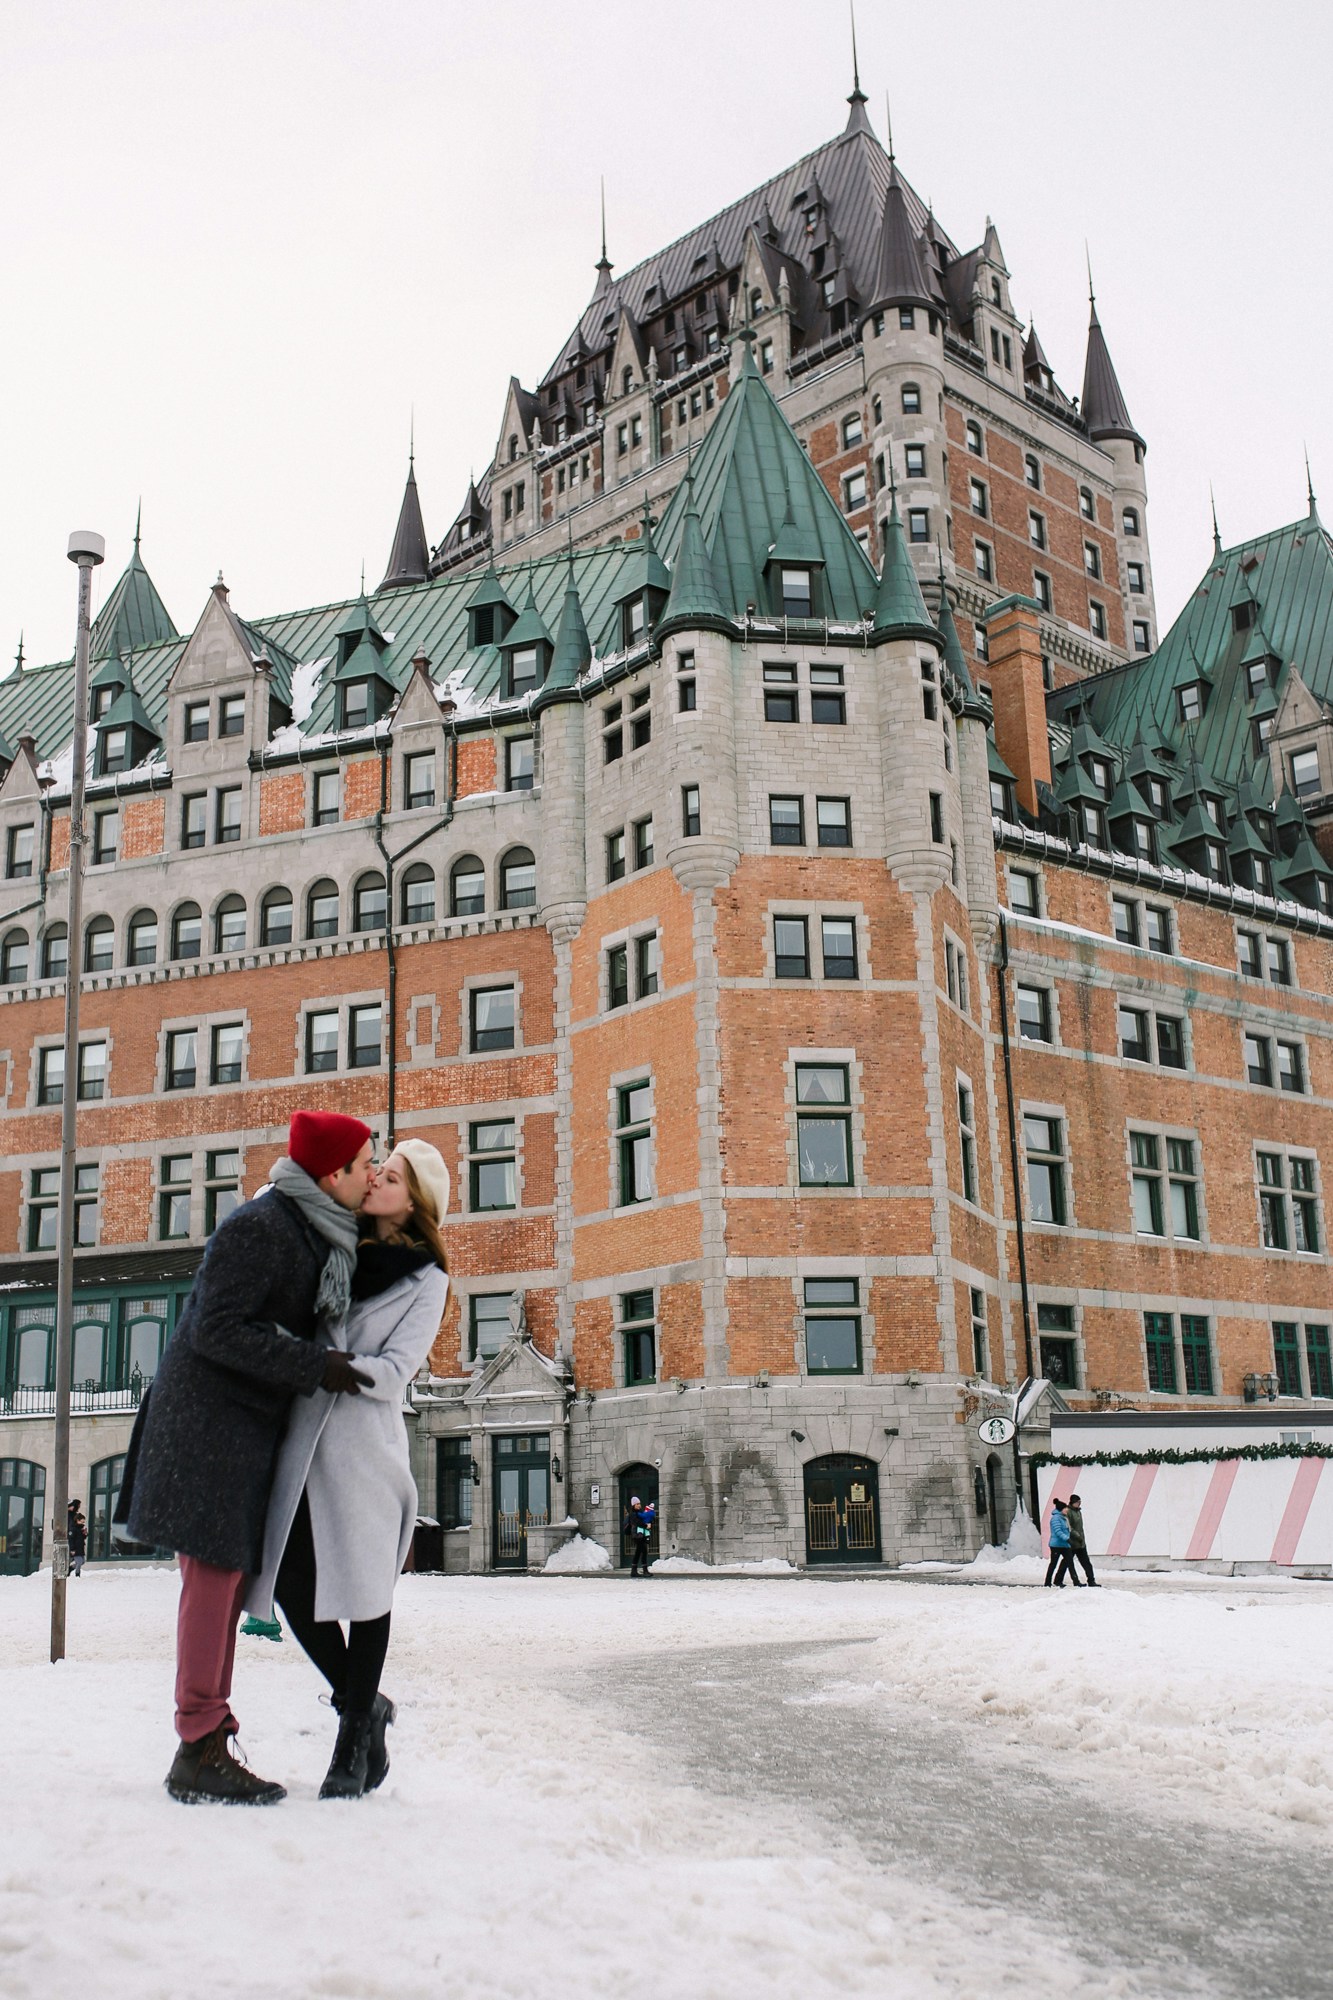 Romantic winter weekend getaway to Quebec City - 48 hour itinerary for couples in the charming, European city in North America.